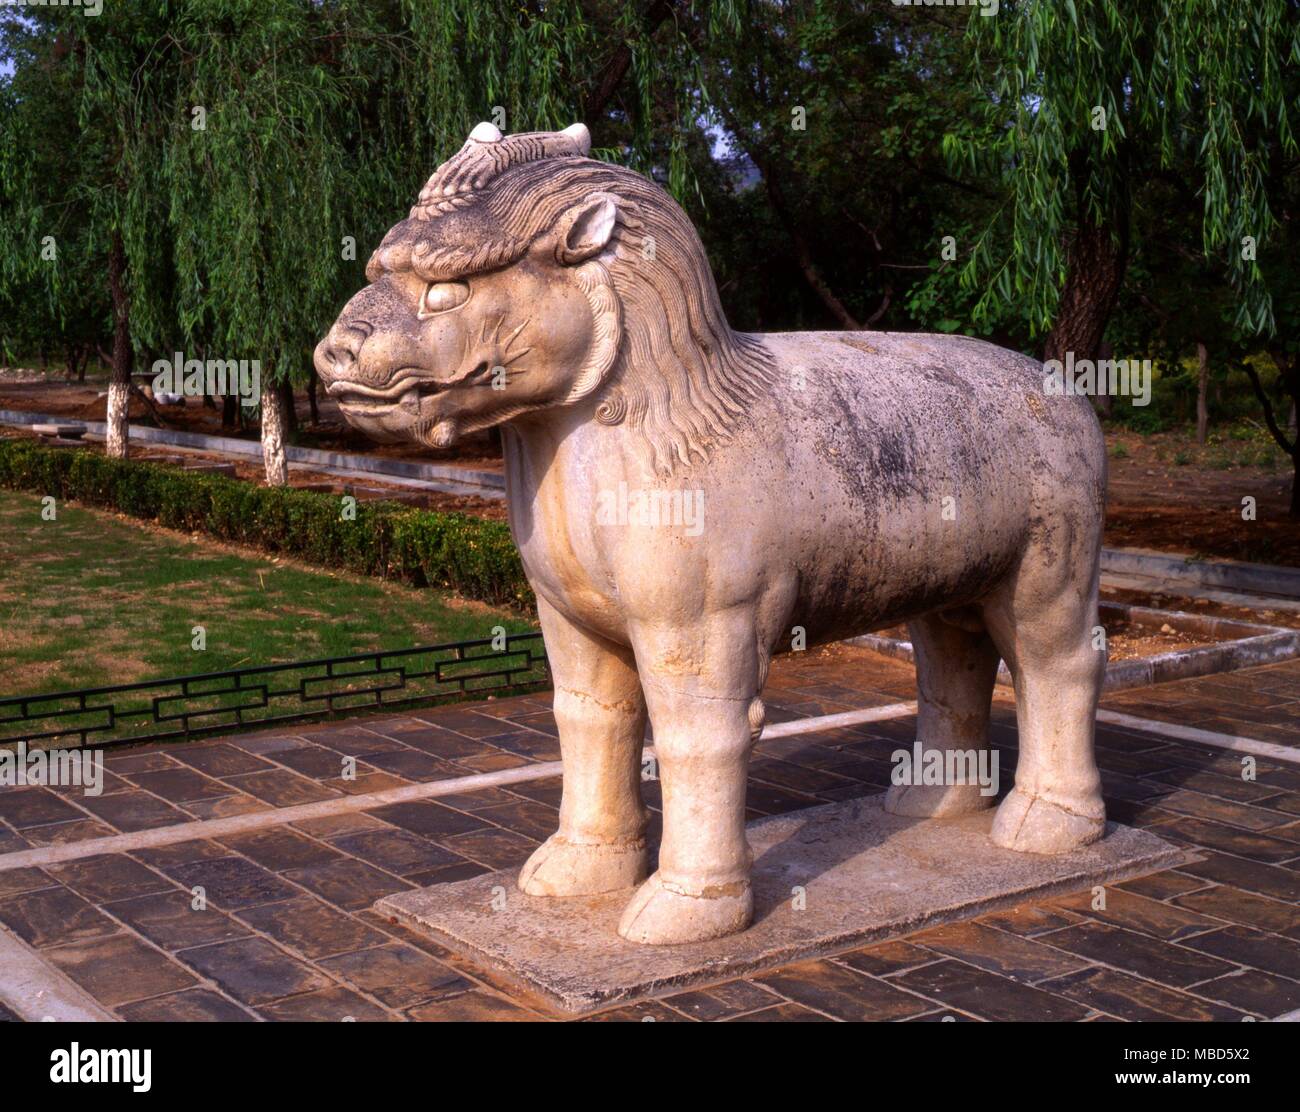 CHINA - MONOCEROS AT THE MING TOMBS on the sacred way leading to the Ming Tombs, Bejing. Stock Photo